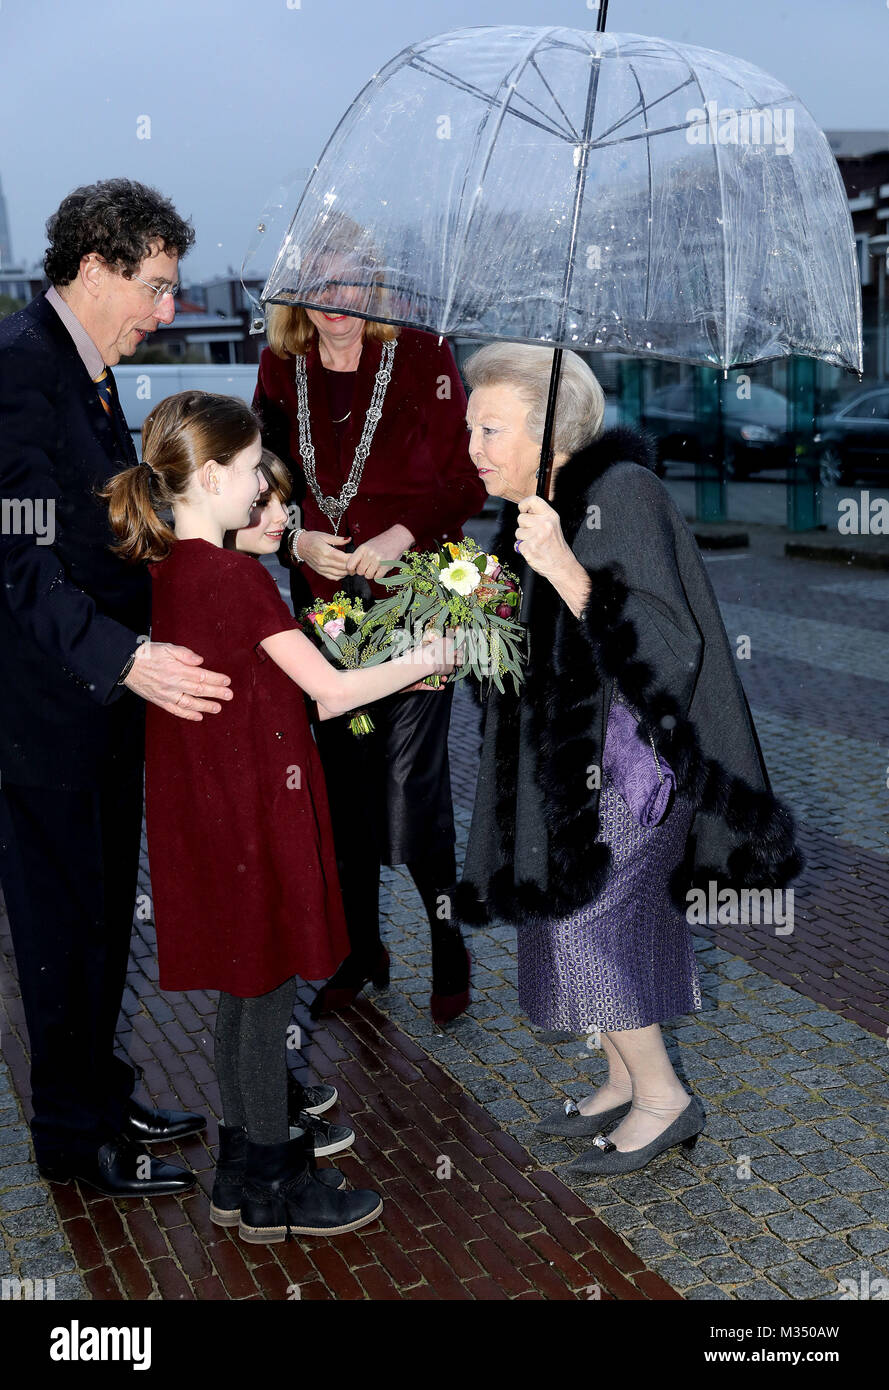 The Hague, Netherlands. 09th Feb, 2018. Princess Beatrix of The Netherlands arrives at Museum Beelden aan Zee in The Hague, on February 09, 2018, to open the exhibition Utopia by André Volten Credit: Albert Nieboer/Netherlands OUT/Point De Vue Out - NO WIRE SERVICE · Credit: Albert Nieboer/RoyalPress/dpa/Alamy Live News Stock Photo